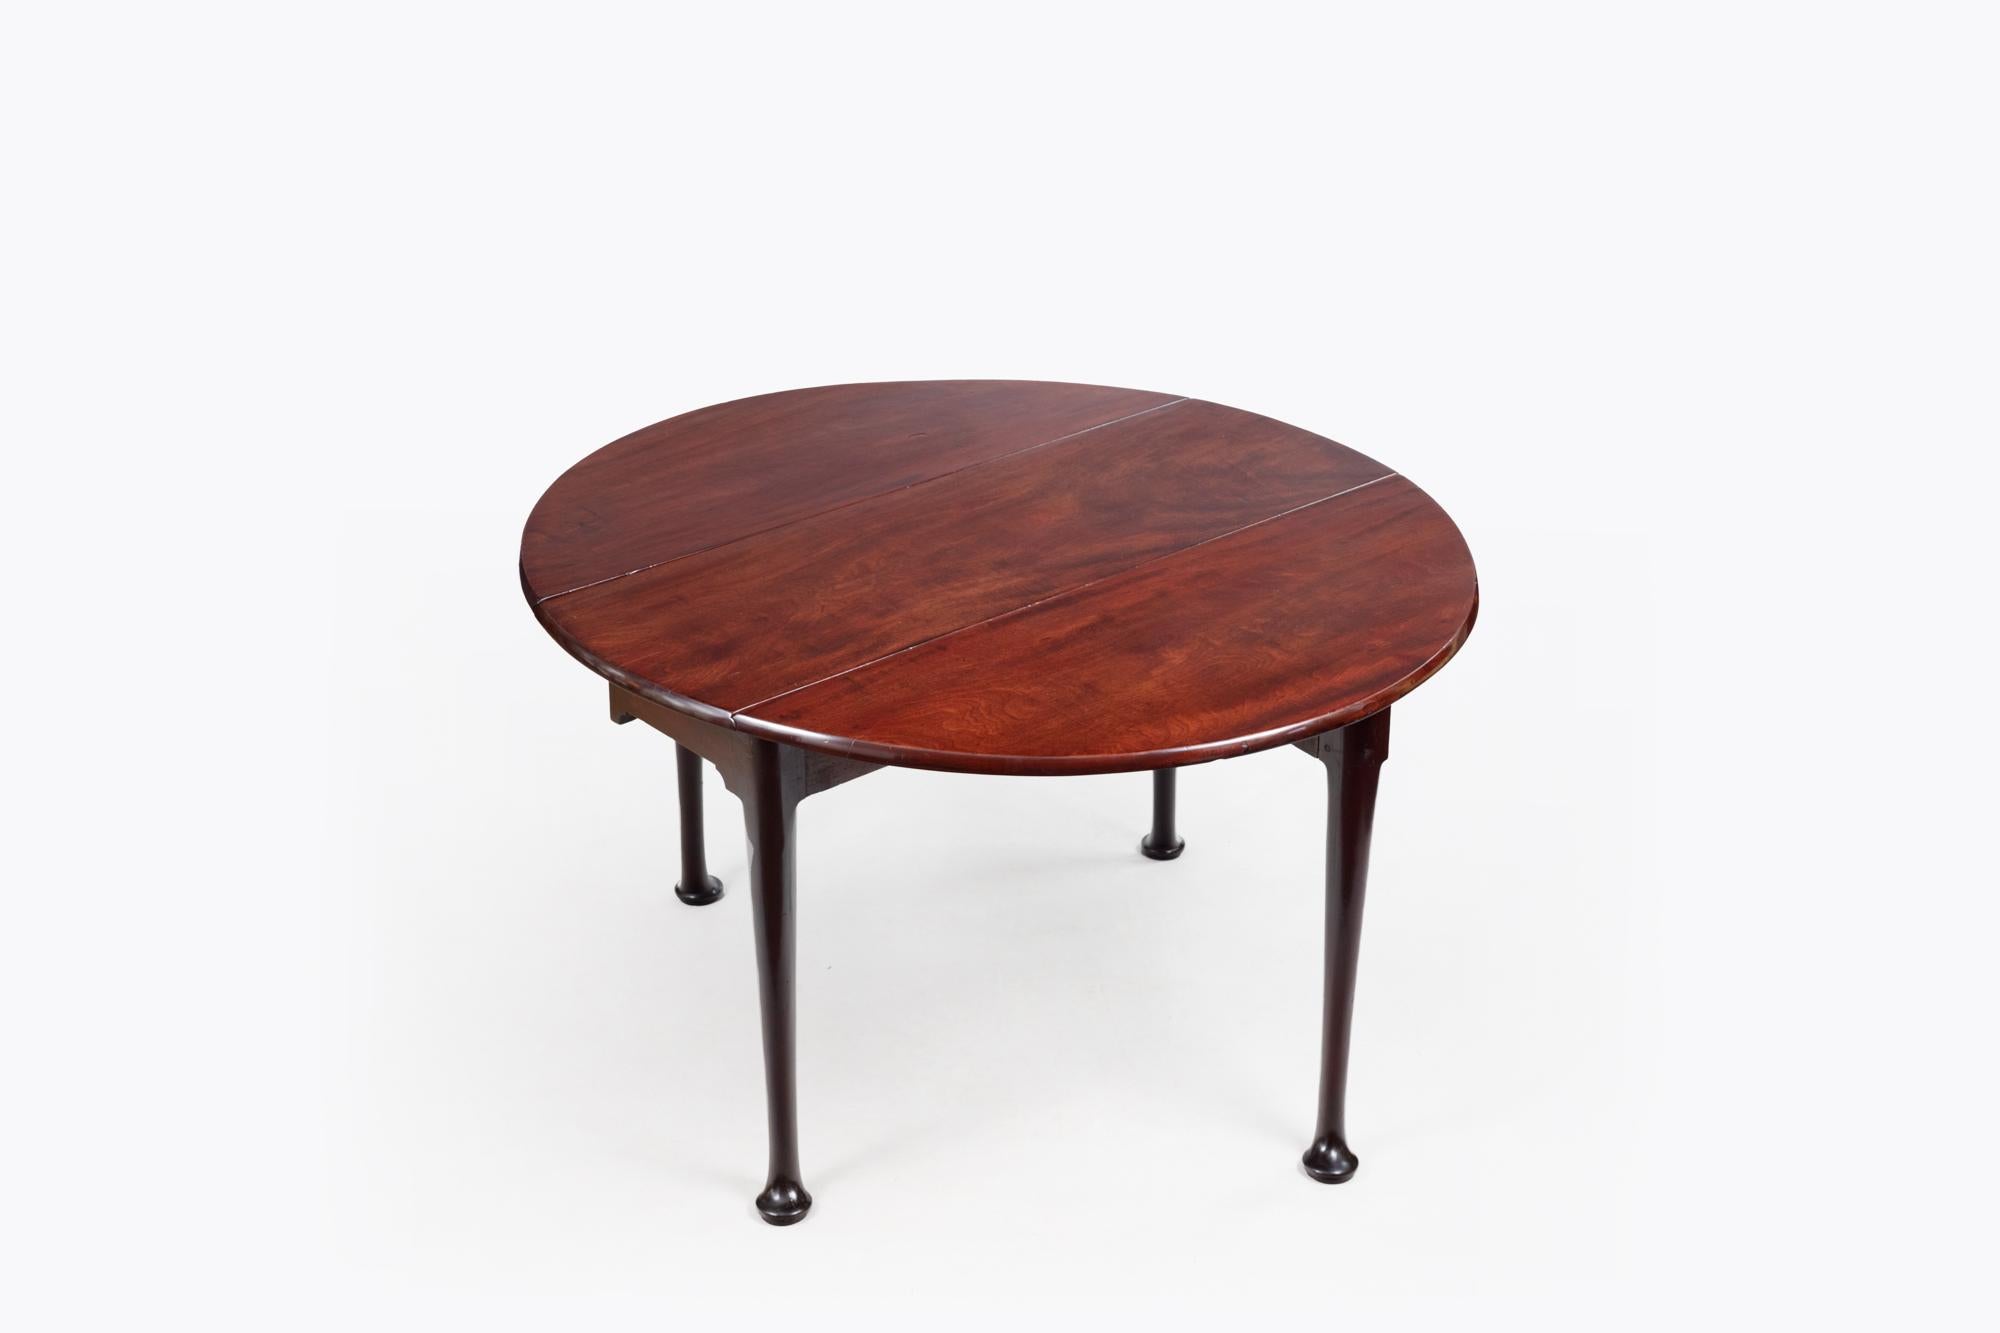 18th Century Georgian Mahogany Oval Drop-Leaf Table. The two ends lift up and are supported by solid mahogany gate legs to create a good-sized oval shape table top. Terminating With Original Pad Feet. Circa 1760.